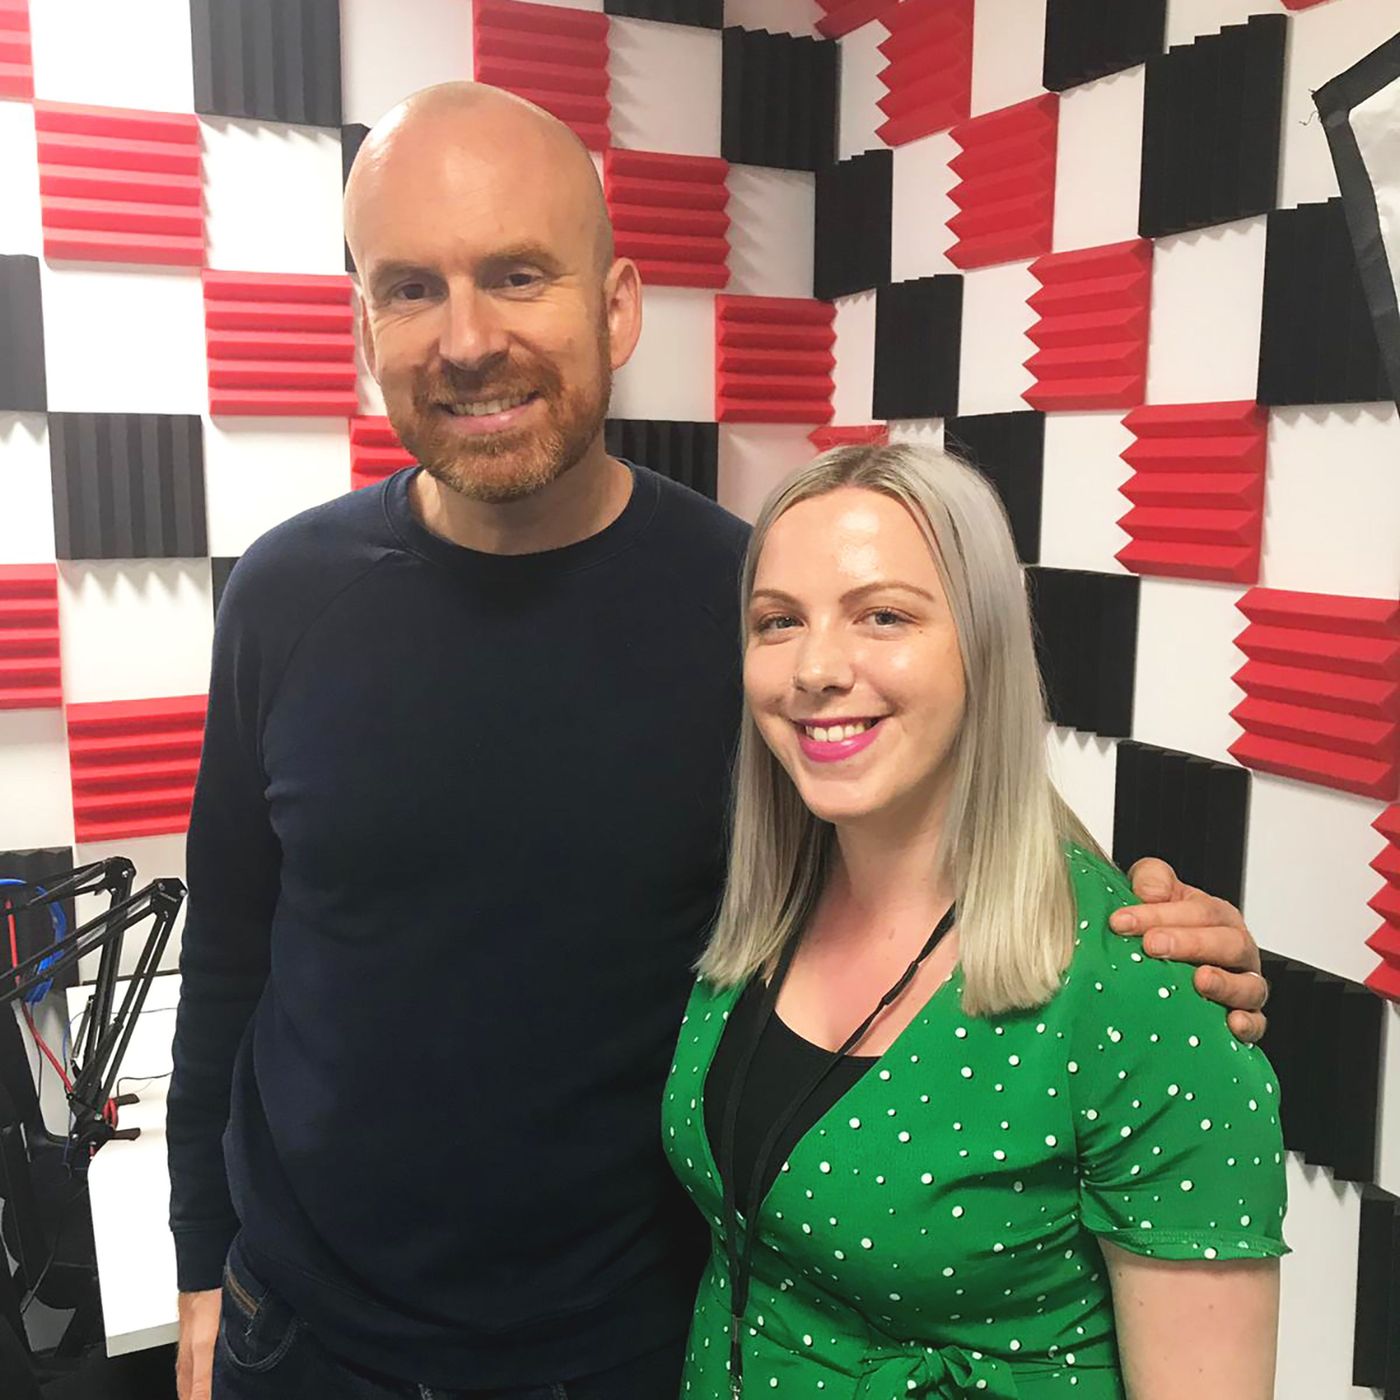 No Really, I’m Fine - Best-selling author Matt Haig talks about his own mental health